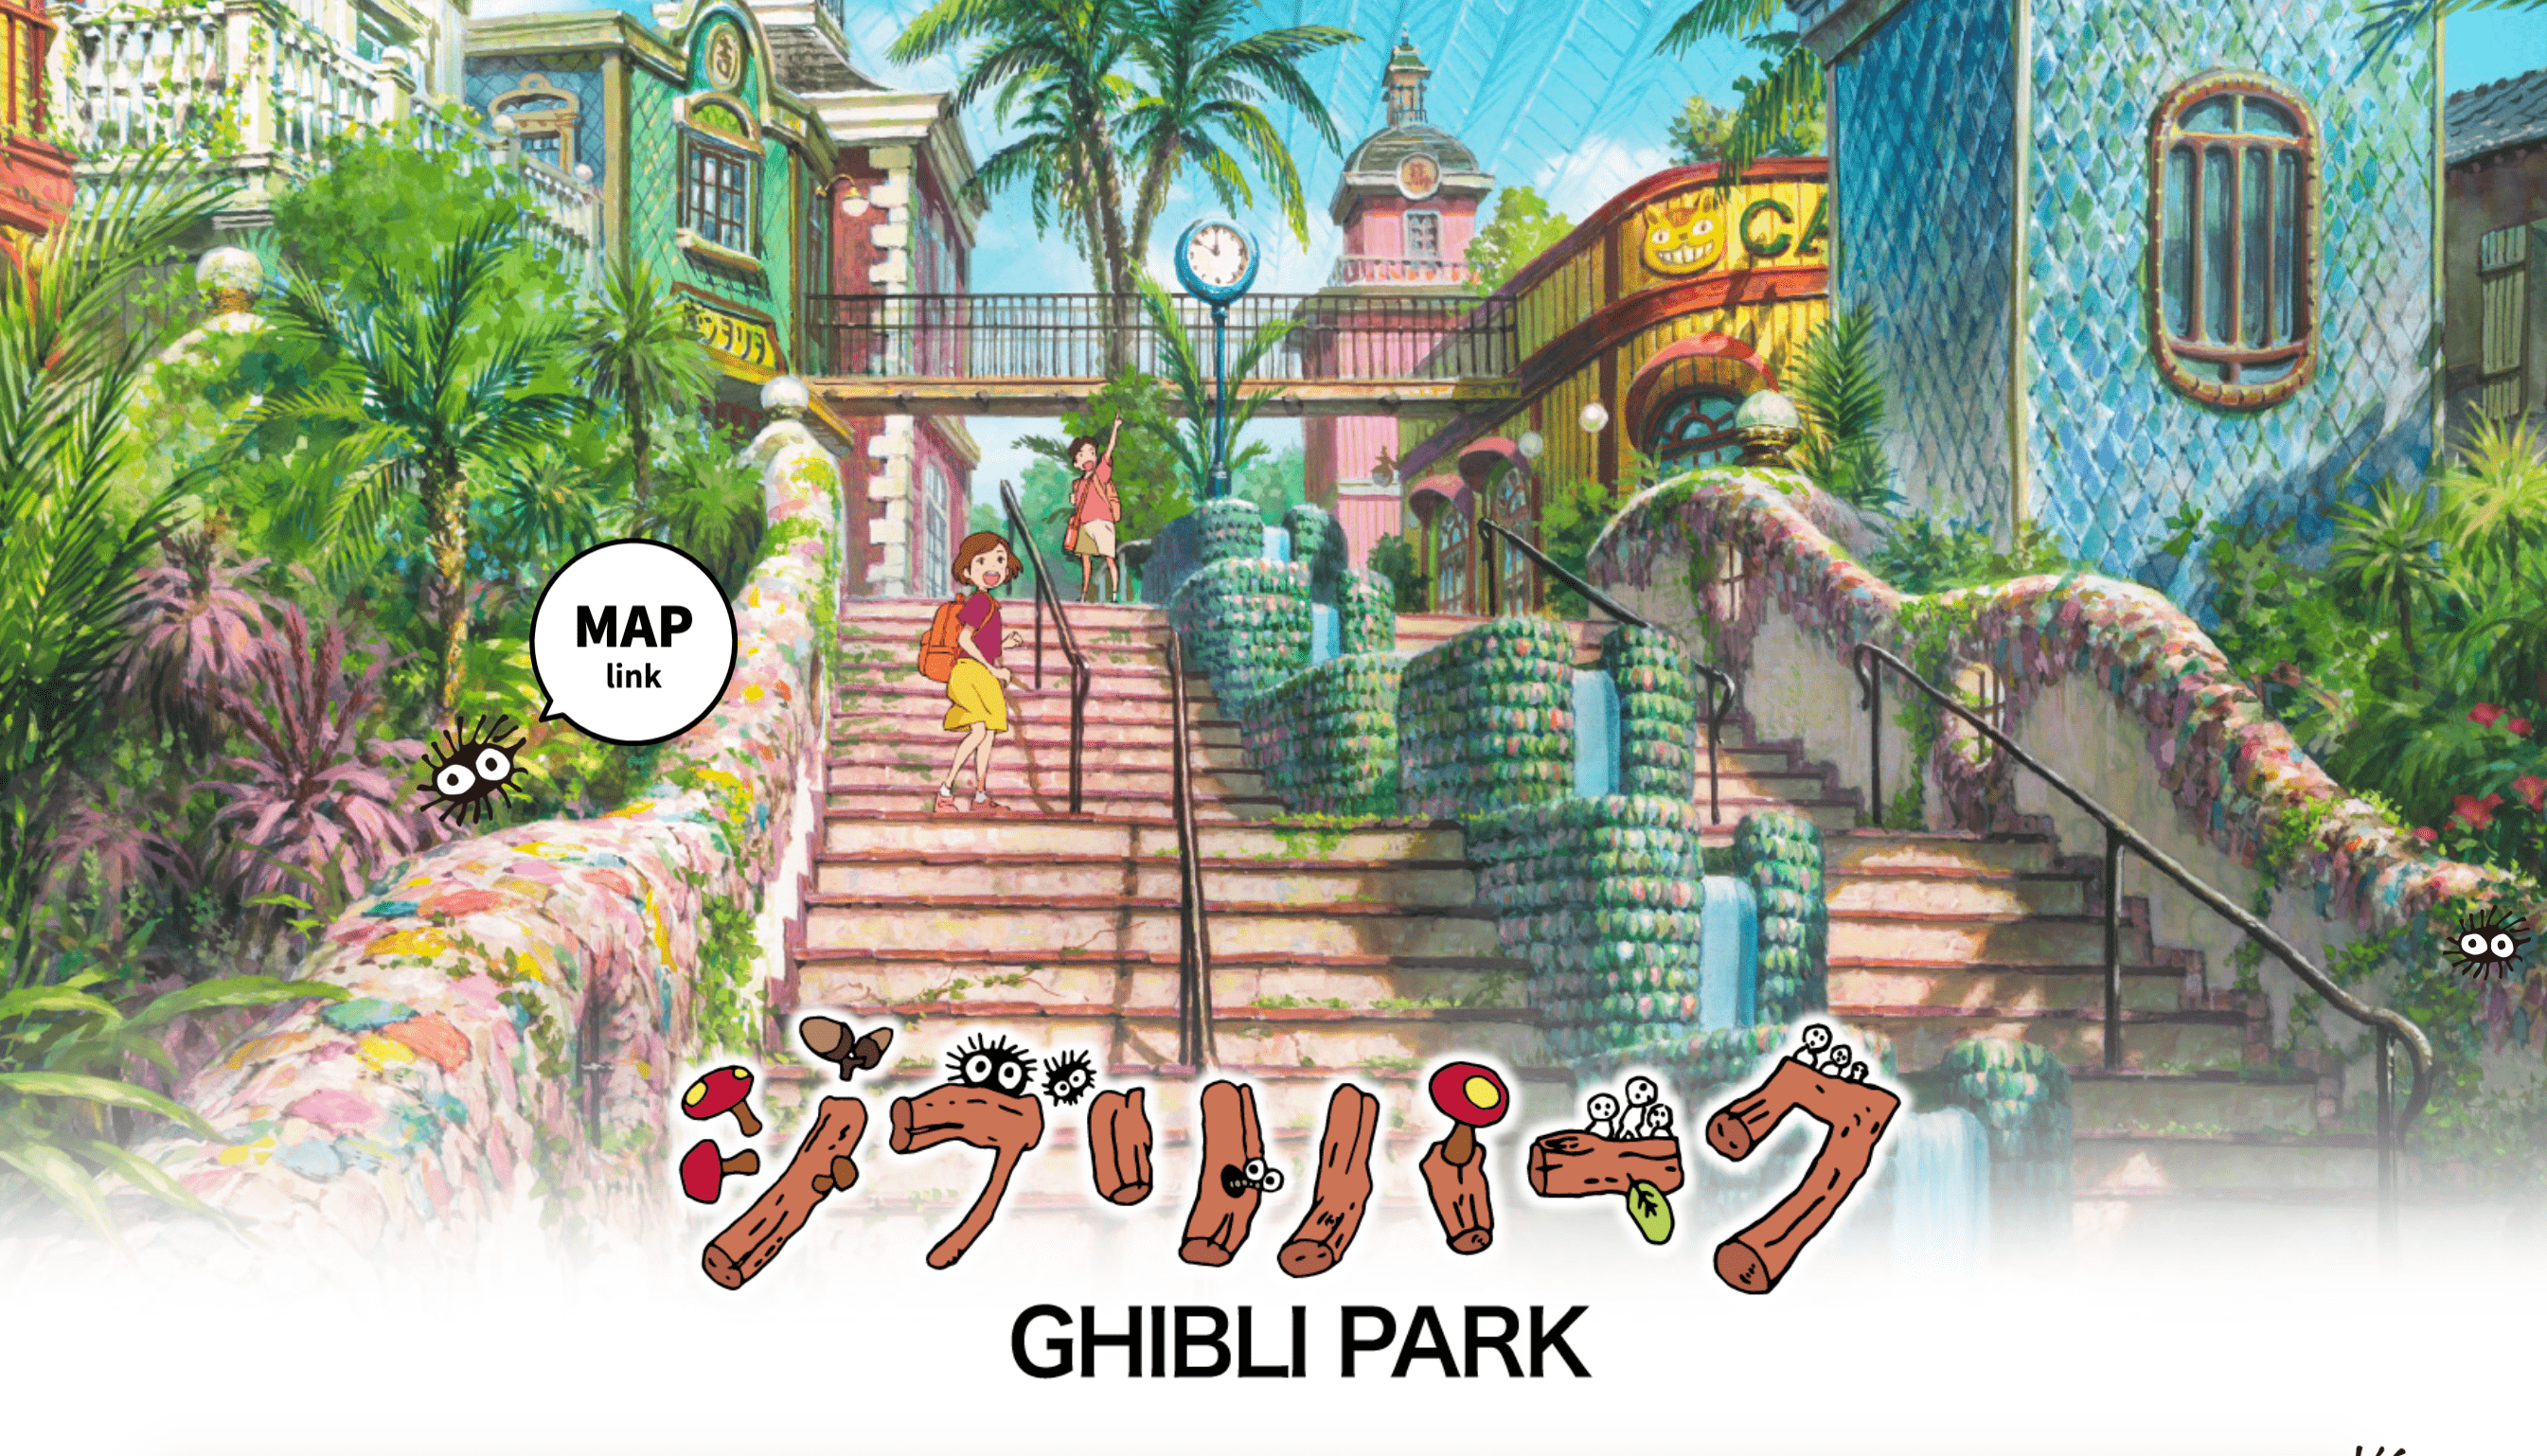 How to Buy Tickets for Ghibli Park from Overseas